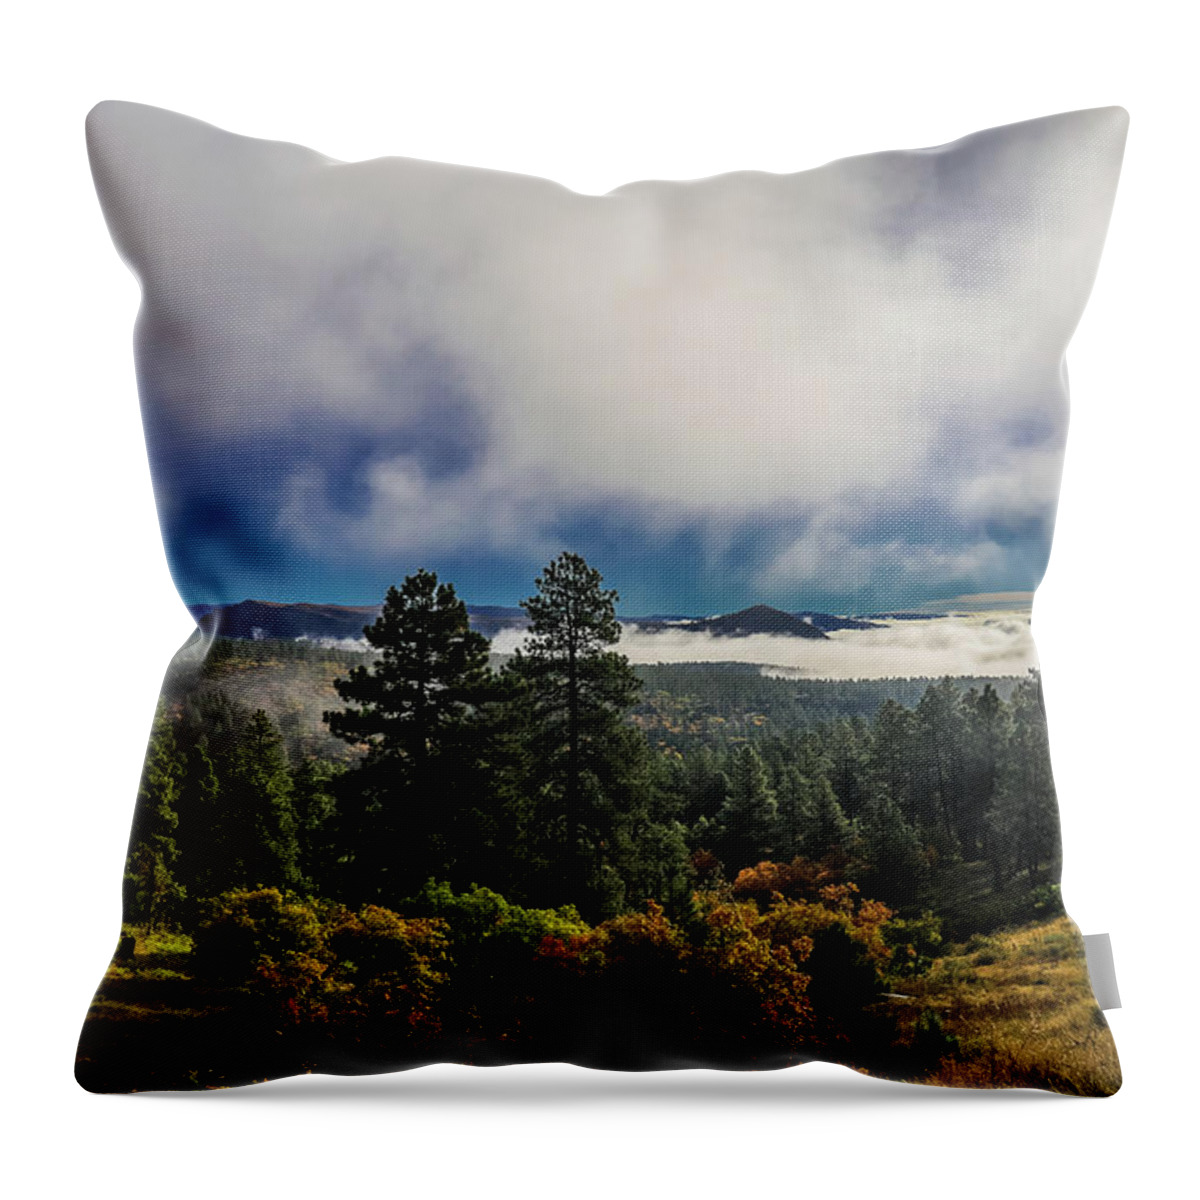 Canon 7d Mark Ii Throw Pillow featuring the photograph Through the Valley by Dennis Dempsie